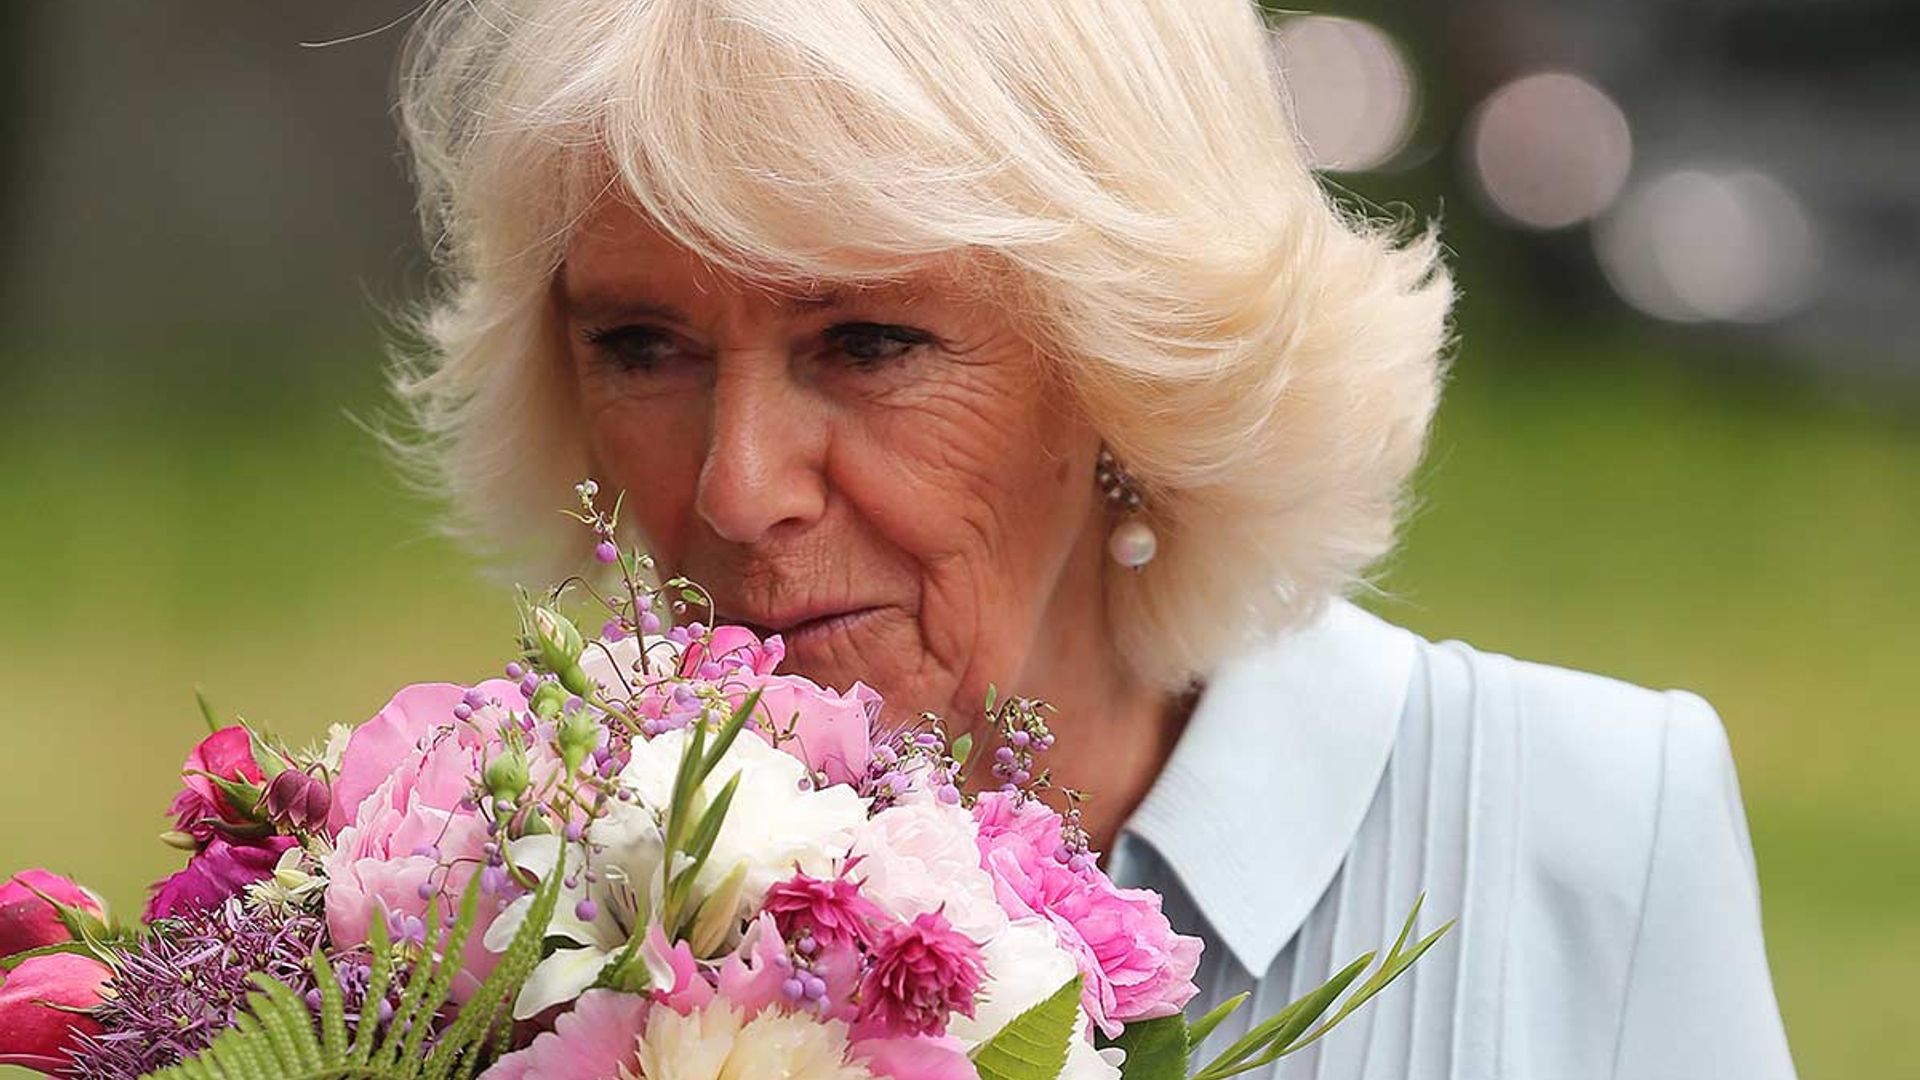 Celebrity daily edit: The Duchess of Cornwall stops to smell the roses - video